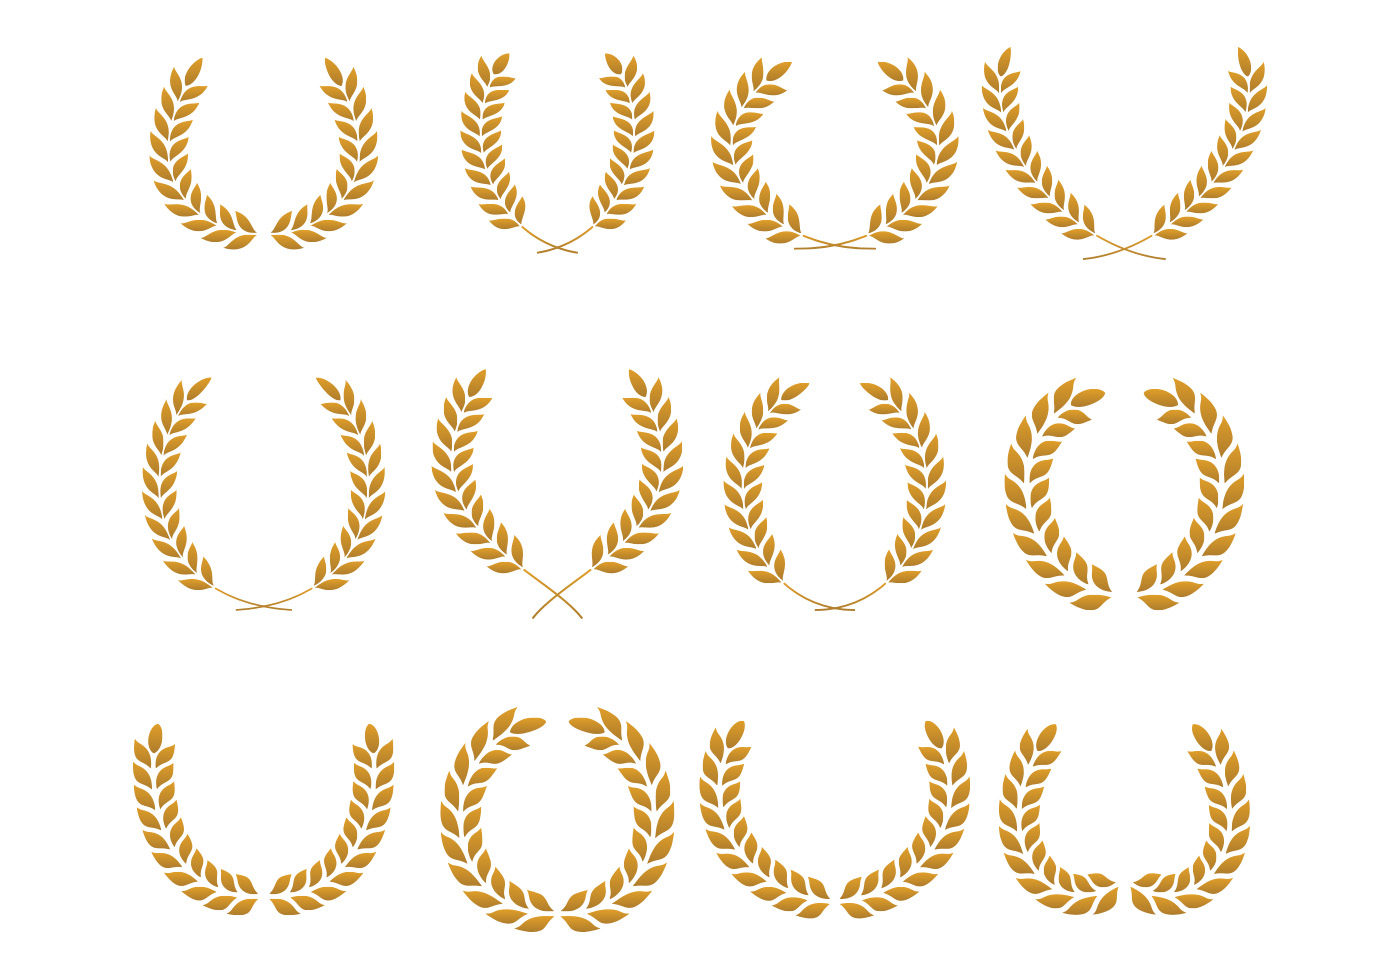 Wheat Vector 1 - Download Free Vector Art, Stock Graphics & Images